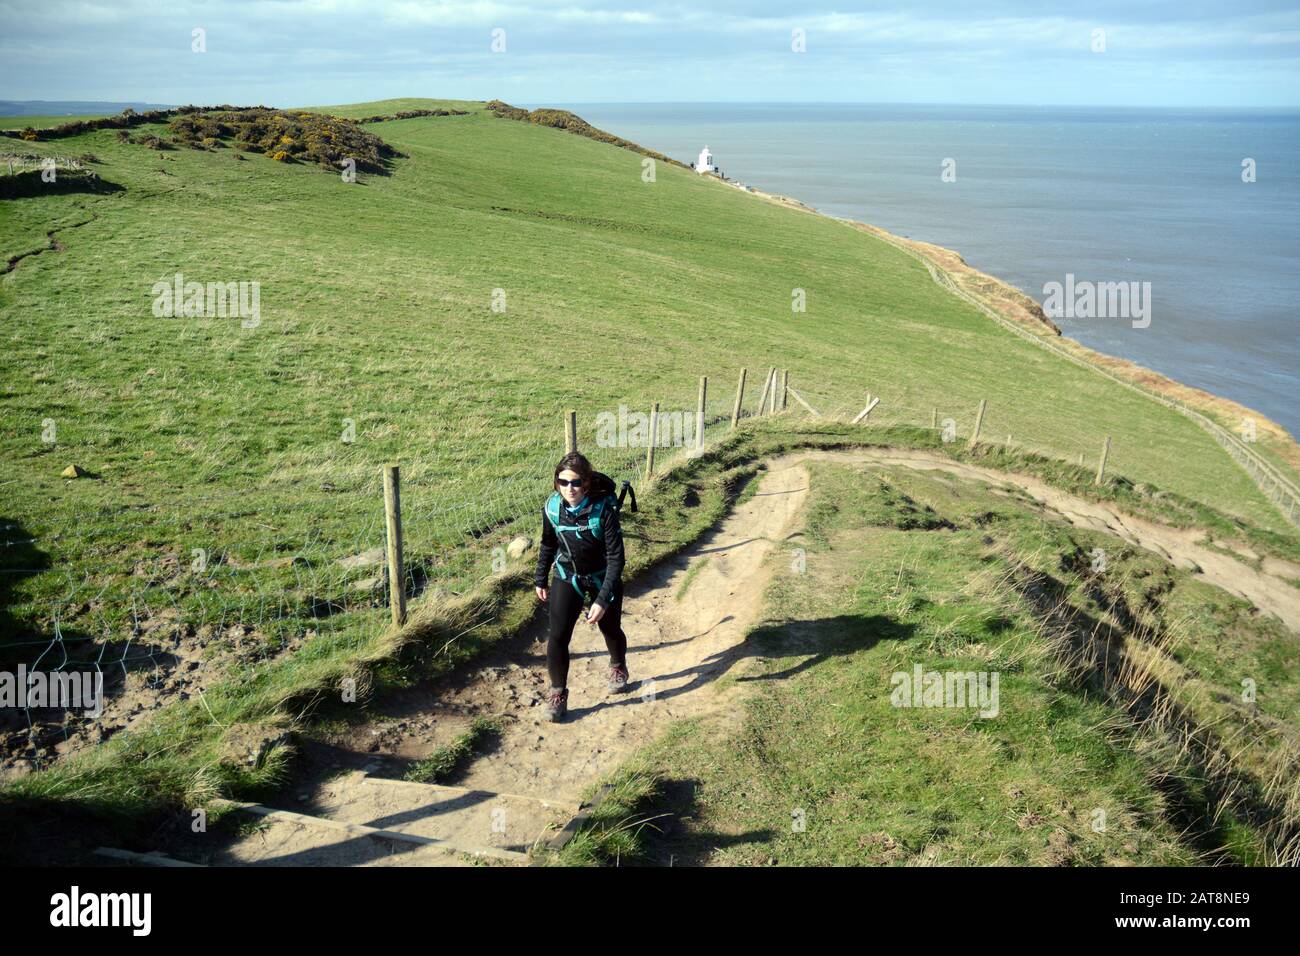 A solo female hiker walking along the Cleveland Way, a hiking trail in North York Moors National Park, Yorkshire, Northern England, United Kingdom. Stock Photo